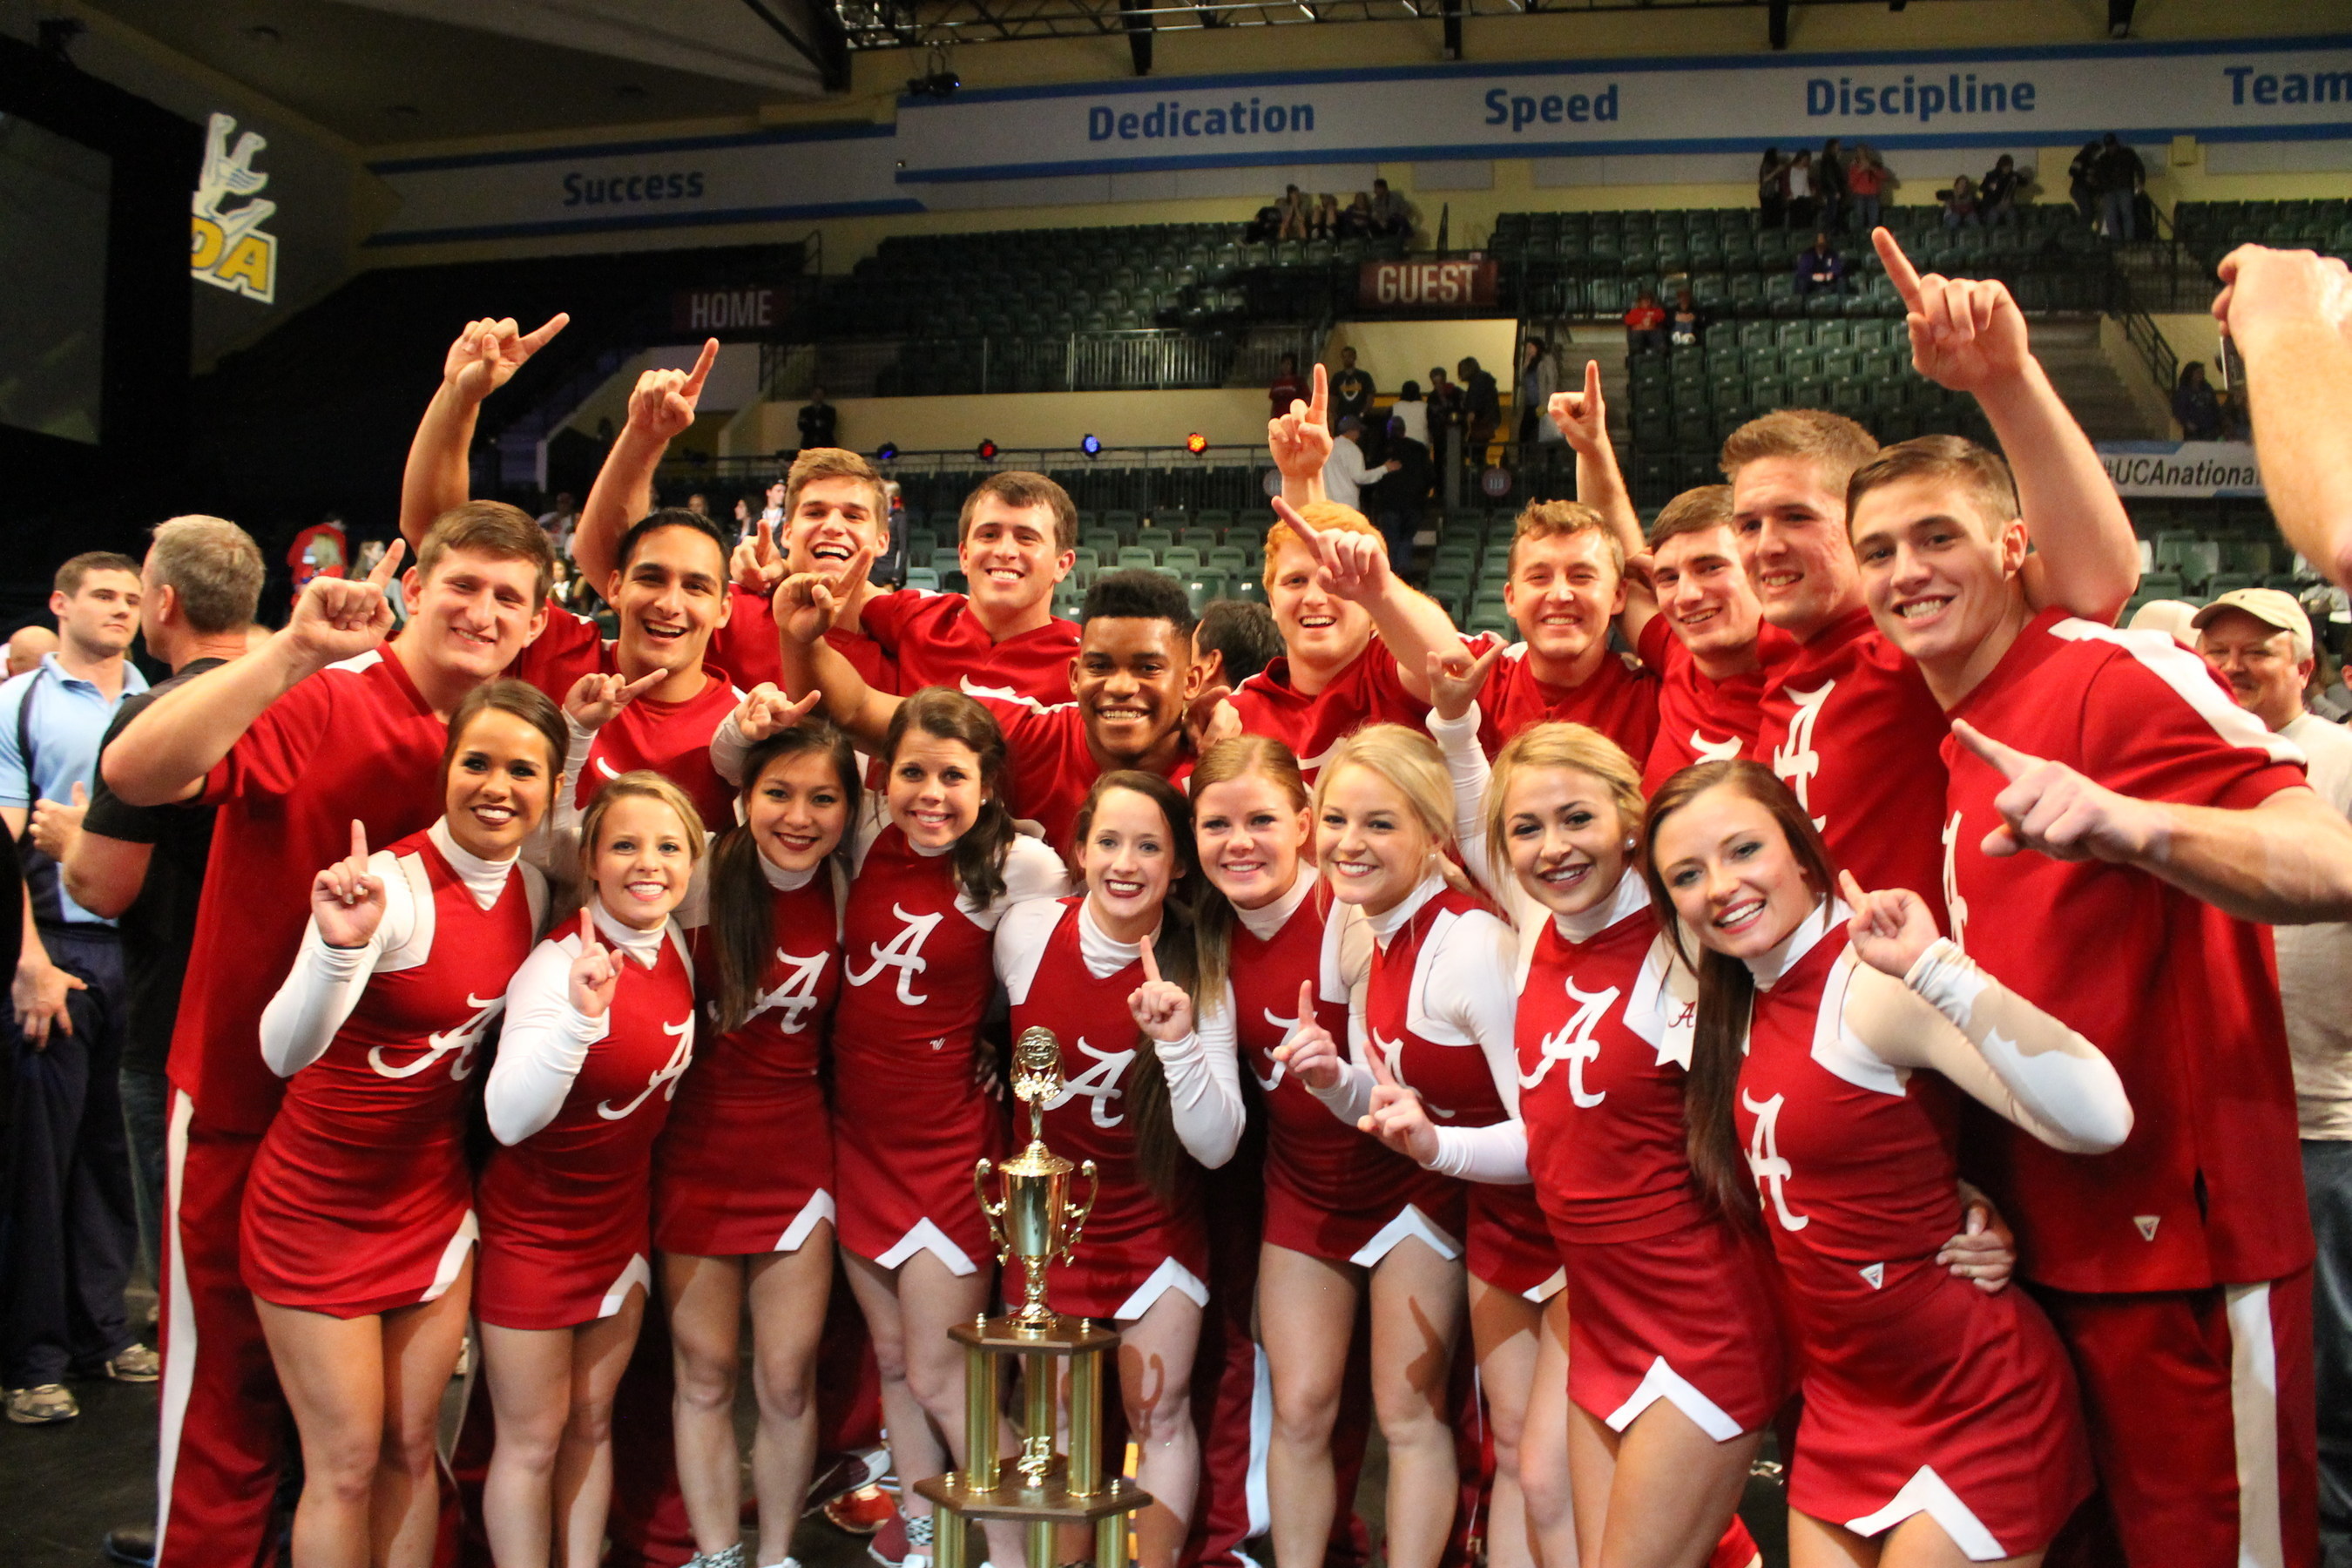 Division 1A winners included Coed Cheer - University of Alabama